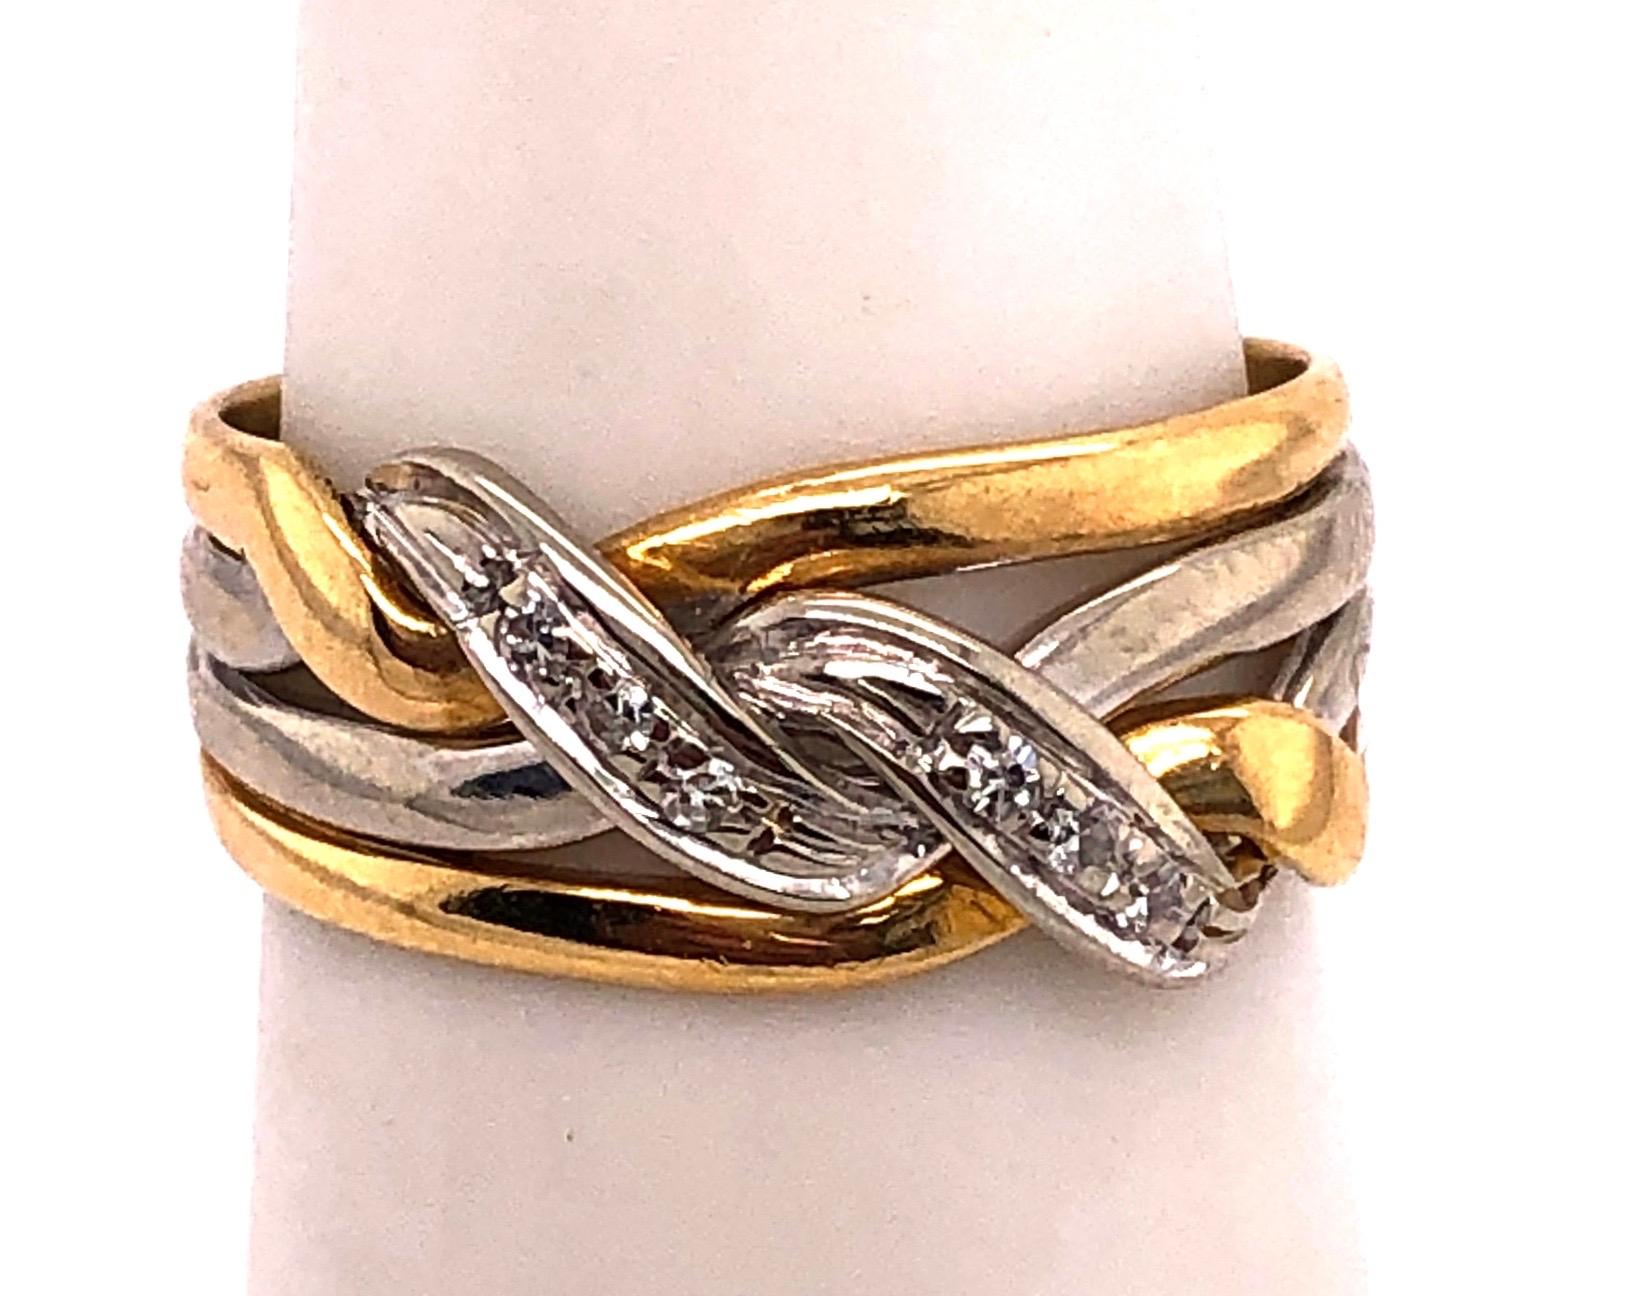 18 Karat Two Tone Gold Twist Ring with Round Diamonds 0.18 Total Diamond Weight.
Size 4.5 
4 grams total weight.